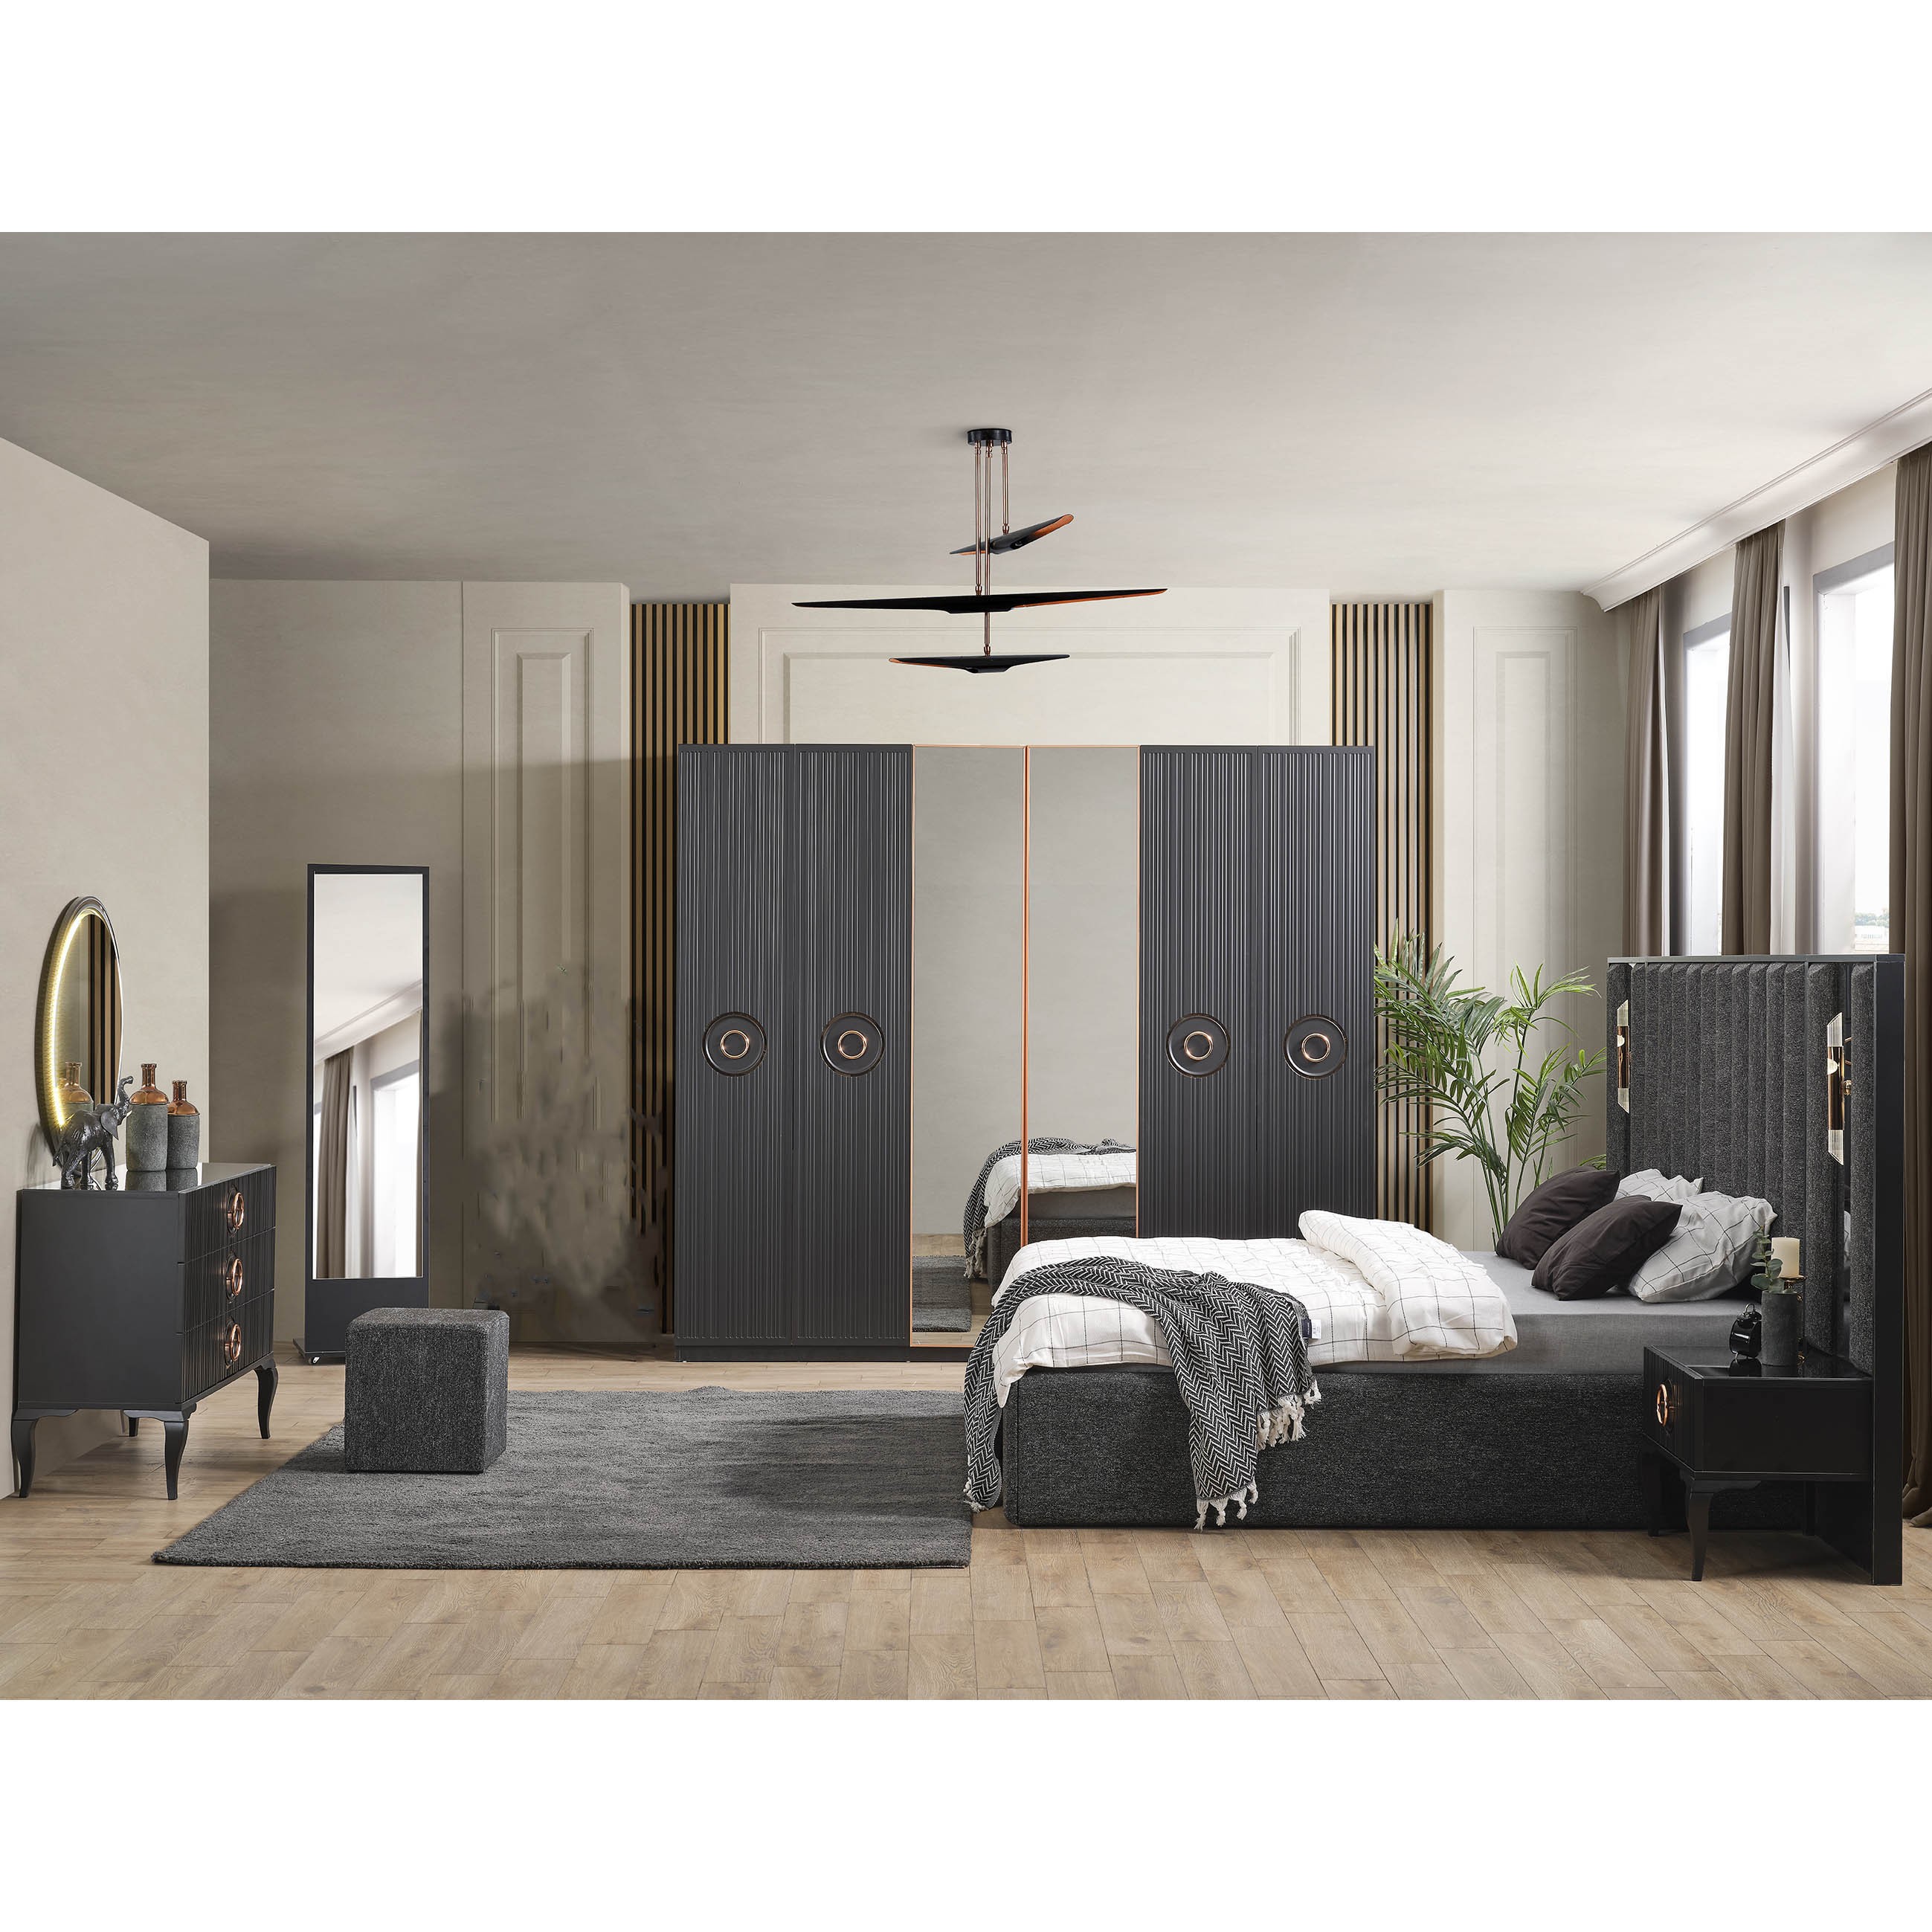 Style Larissa Vol2 Bed Without Storage 180x200 cm